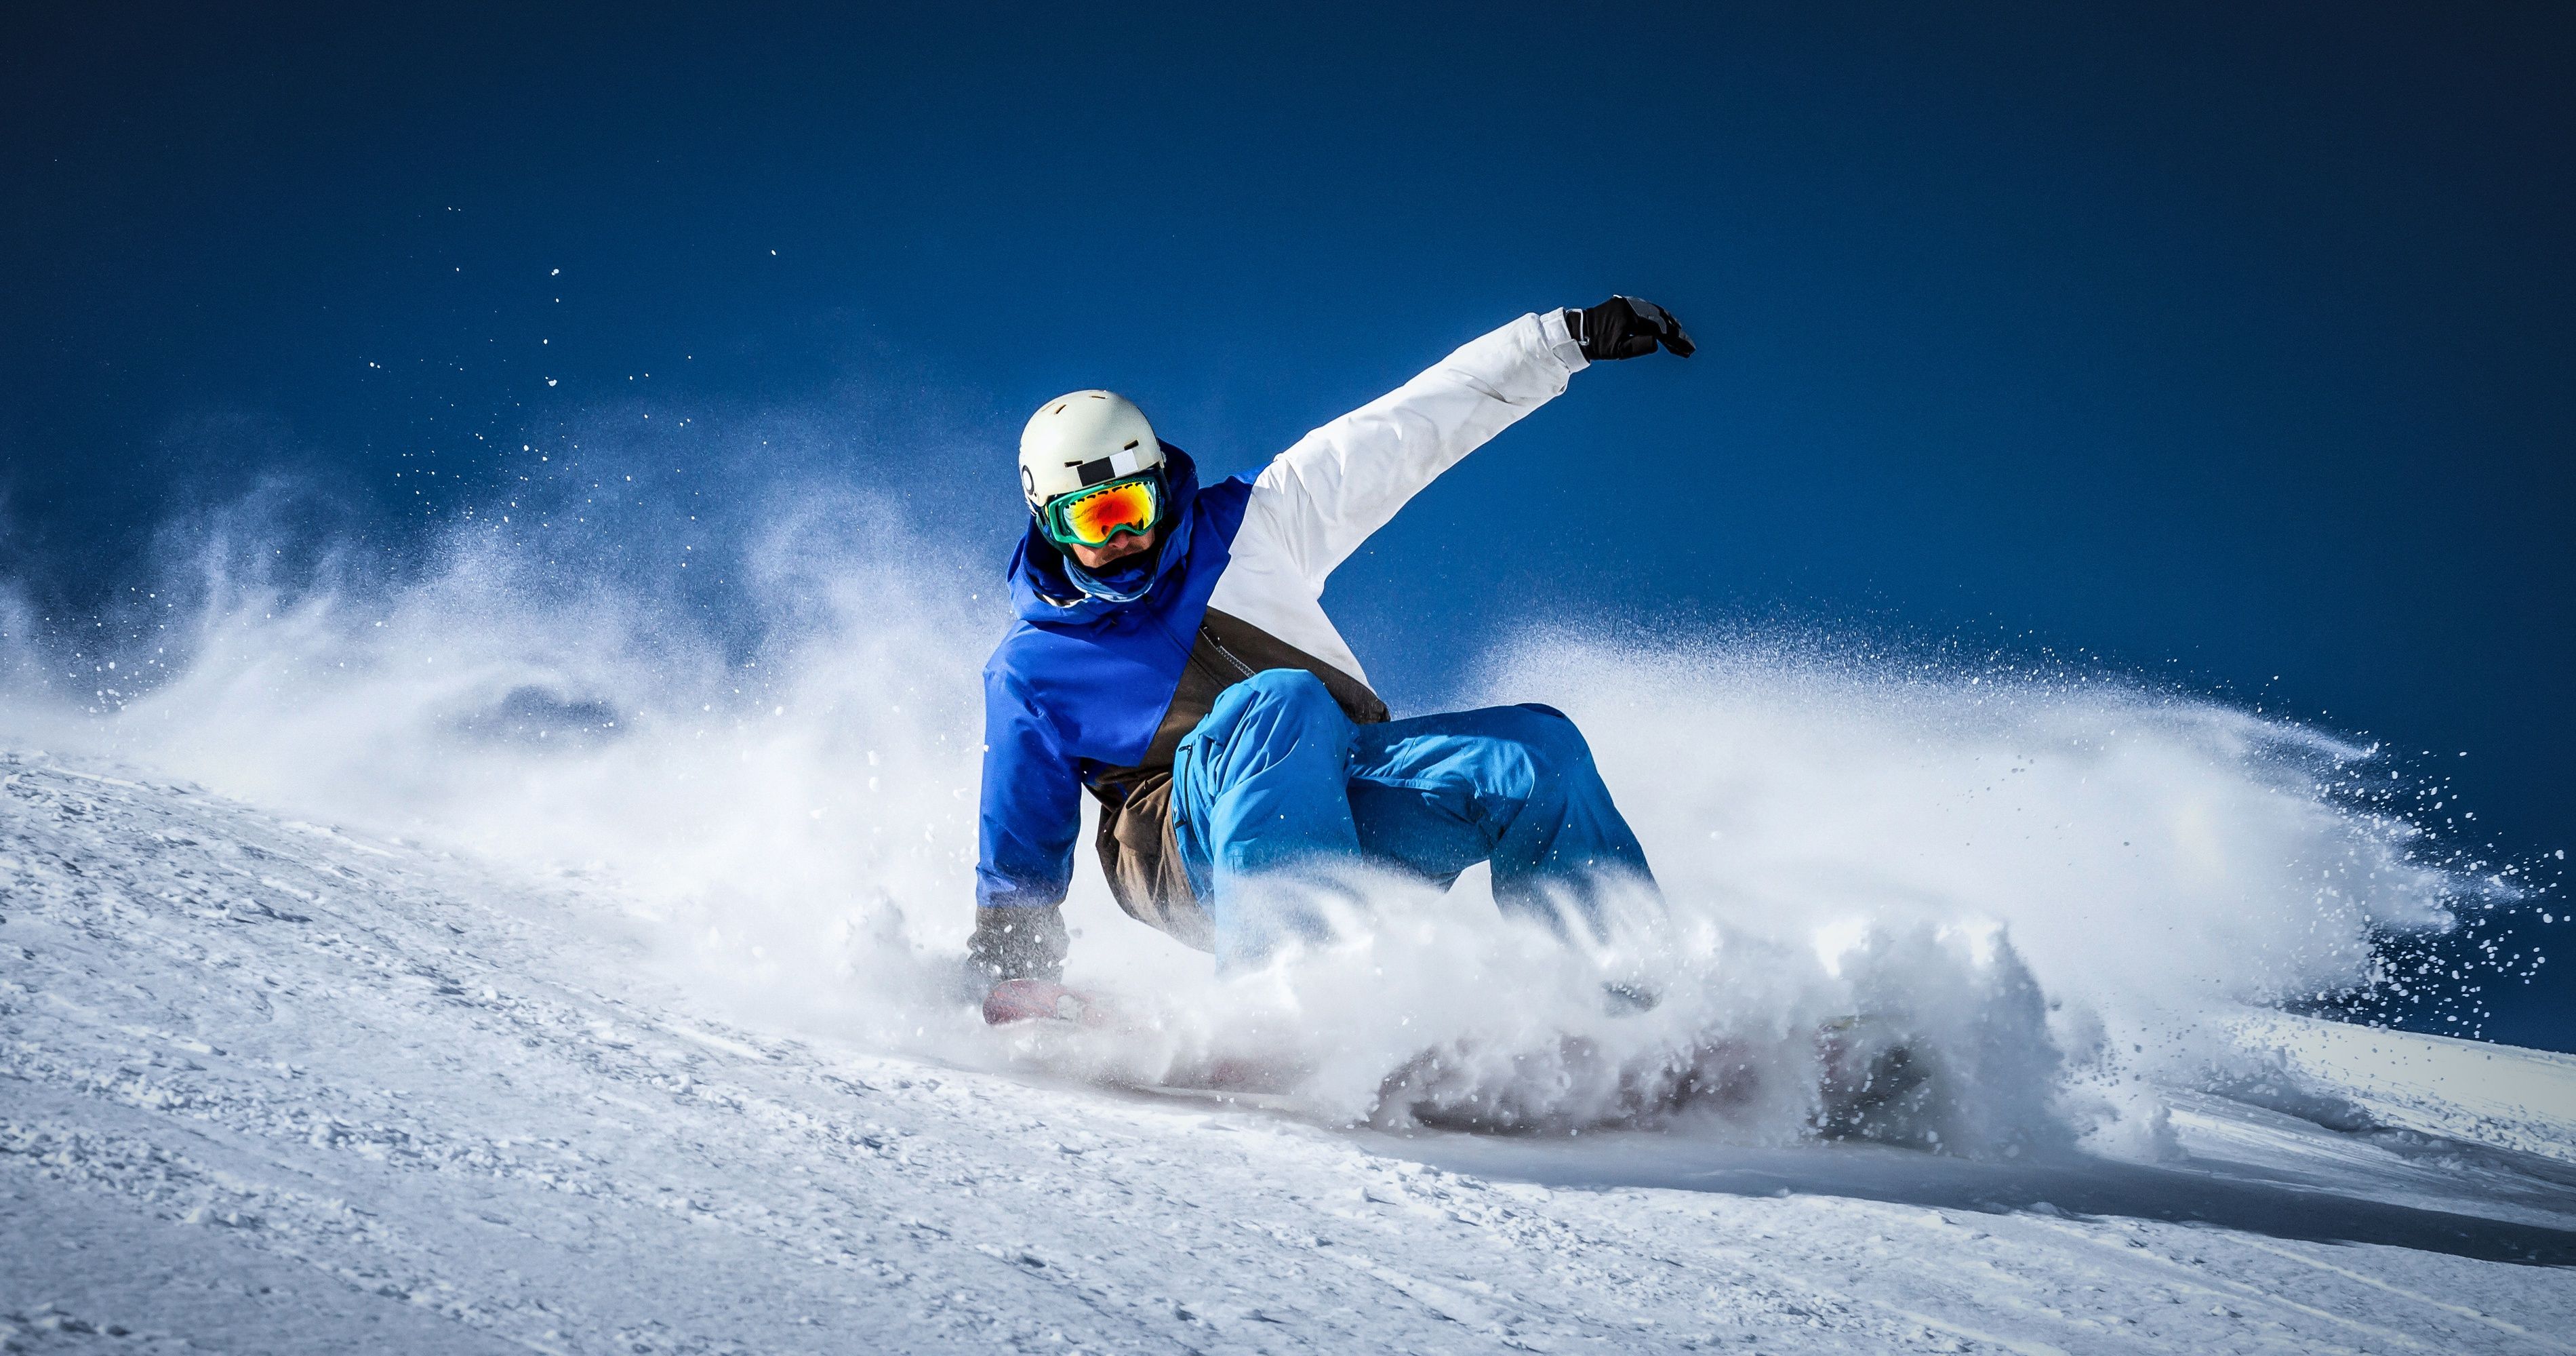 Snowboarding Macbook Pro Retina HD 4k Wallpaper, Image, Background, Photo and Picture